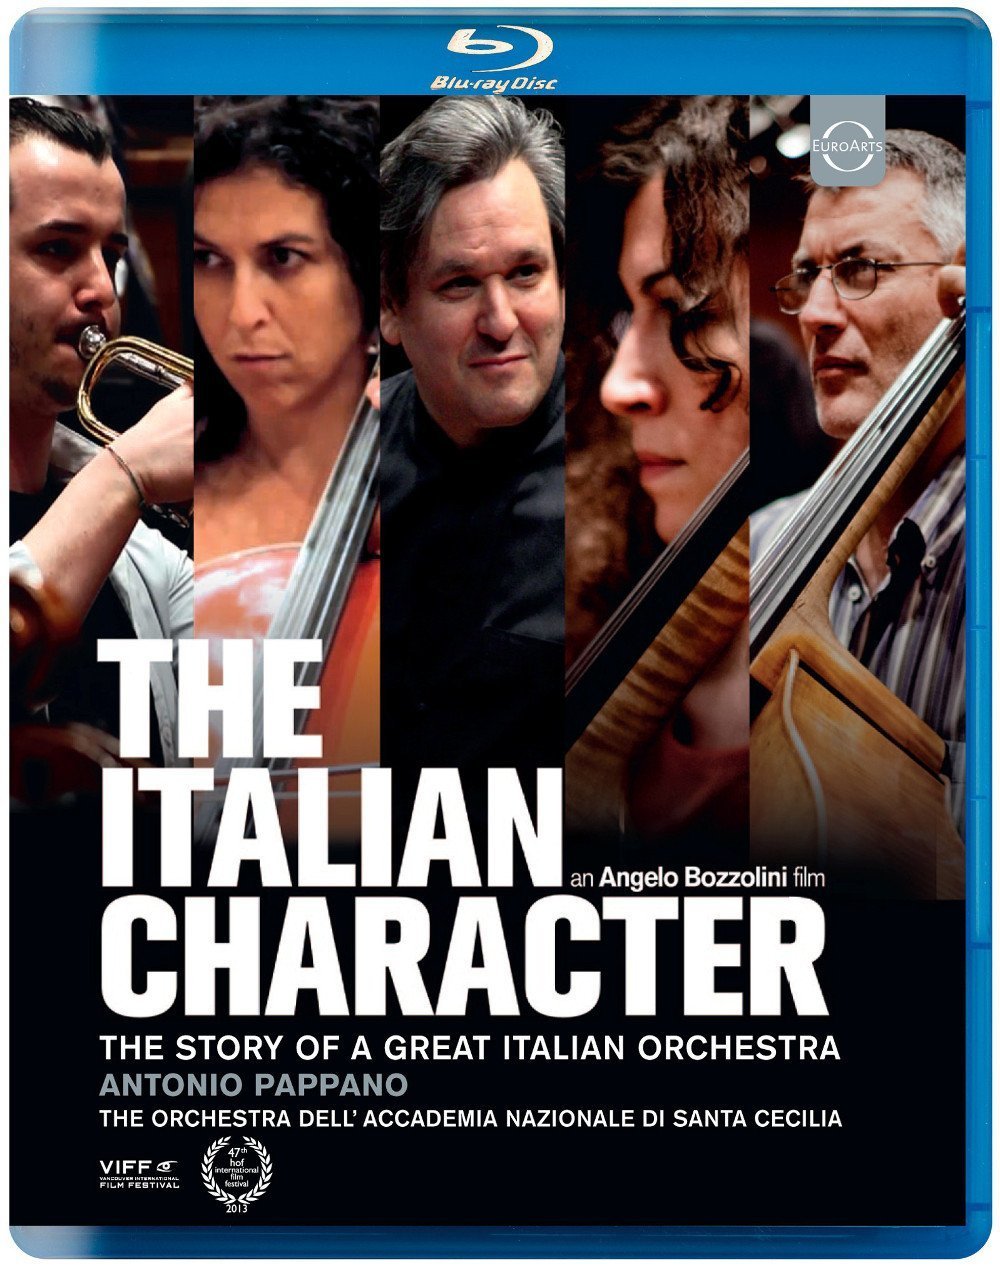 The Story Of A Great Italien Orchestra